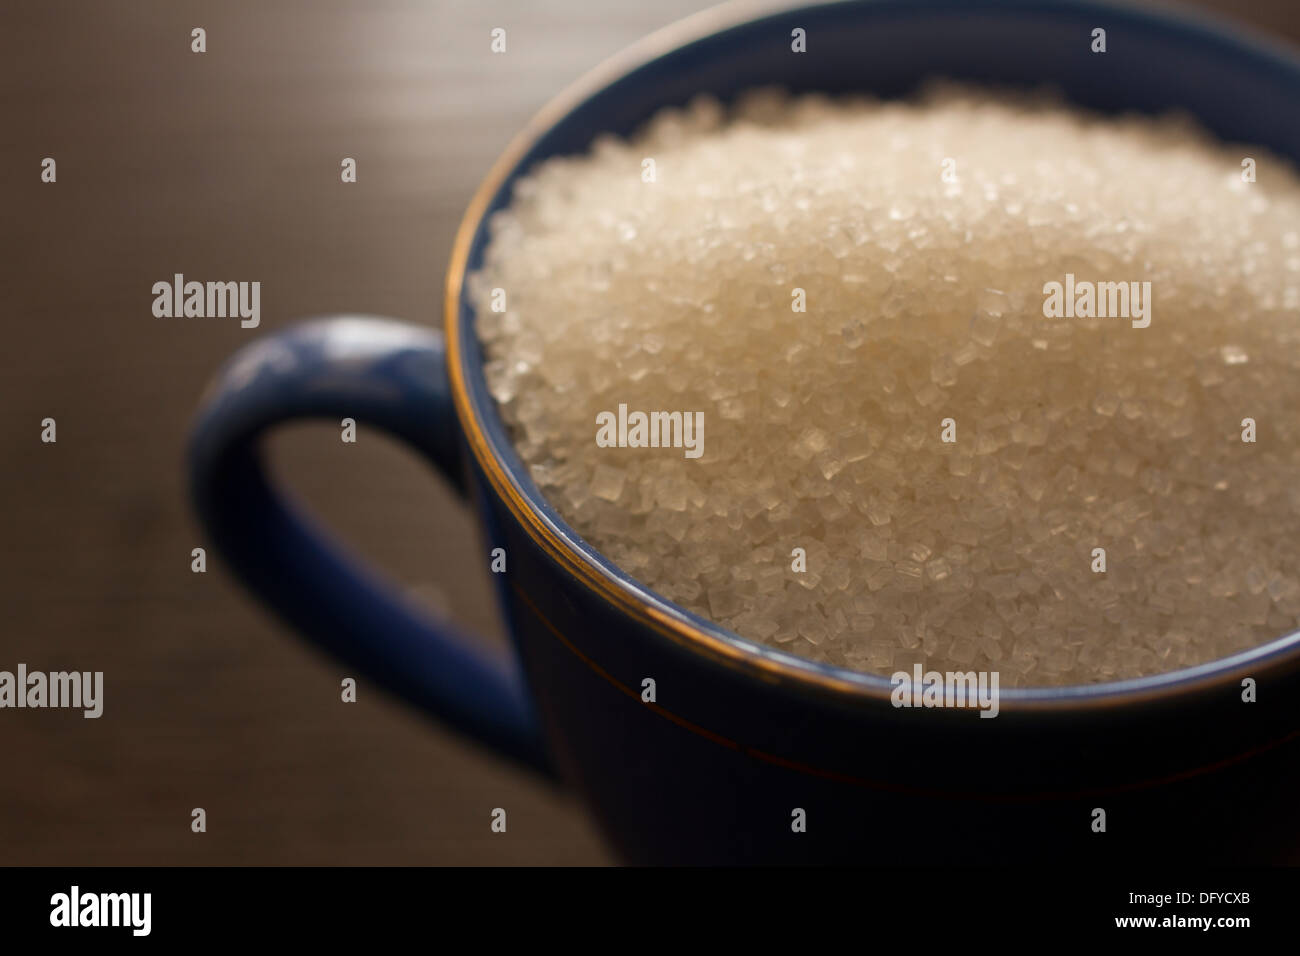 A cup full of sugar. Stock Photo